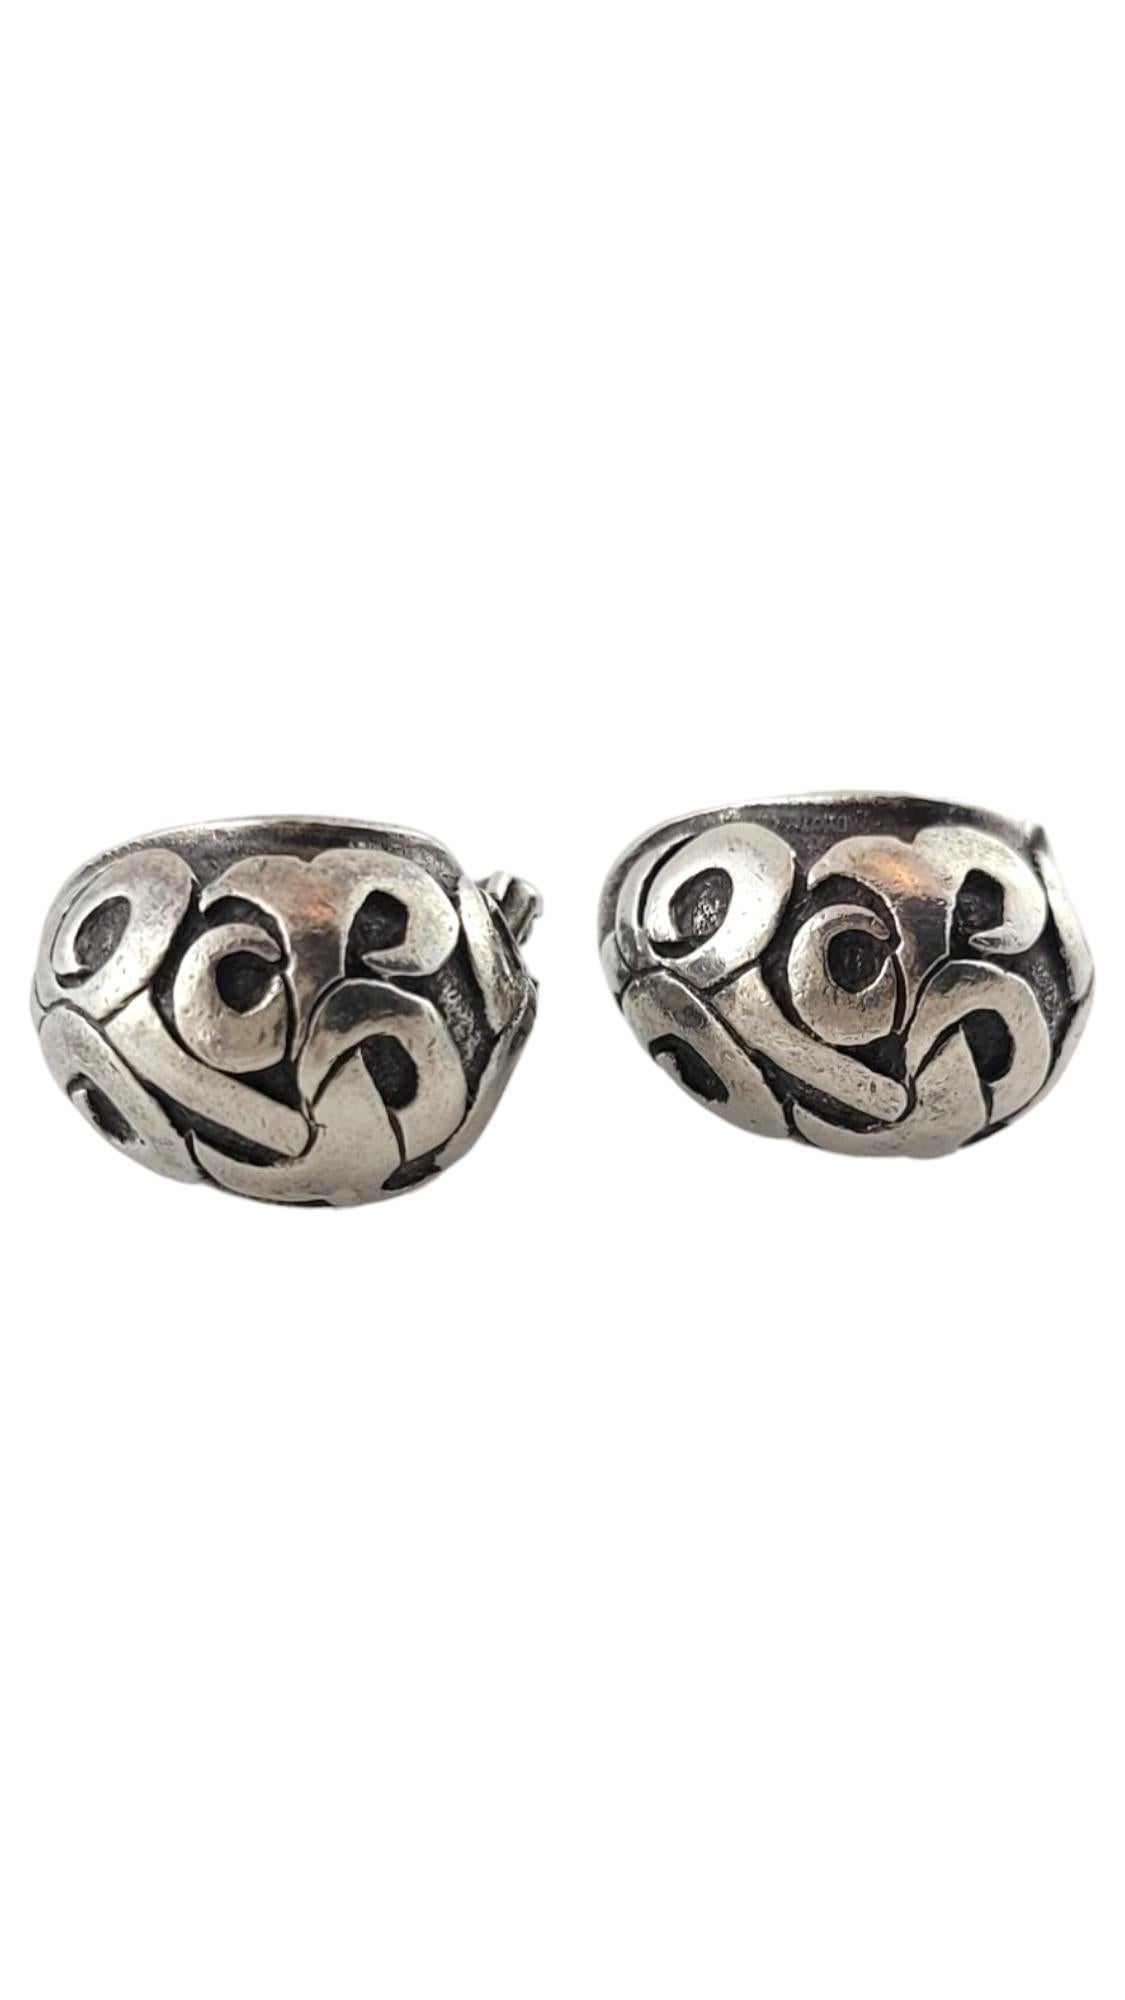 Vintage Sterling Silver John Hardy Cuff Earrings

These gorgeous sterling silver cuff earrings by designer John Hardy are going to look amazing on you!

Size: 17.05mm X 12.51mm X 6.9mm

Weight: 6.72 dwt/ 10.45 g

Hallmark: 925

Very good condition,